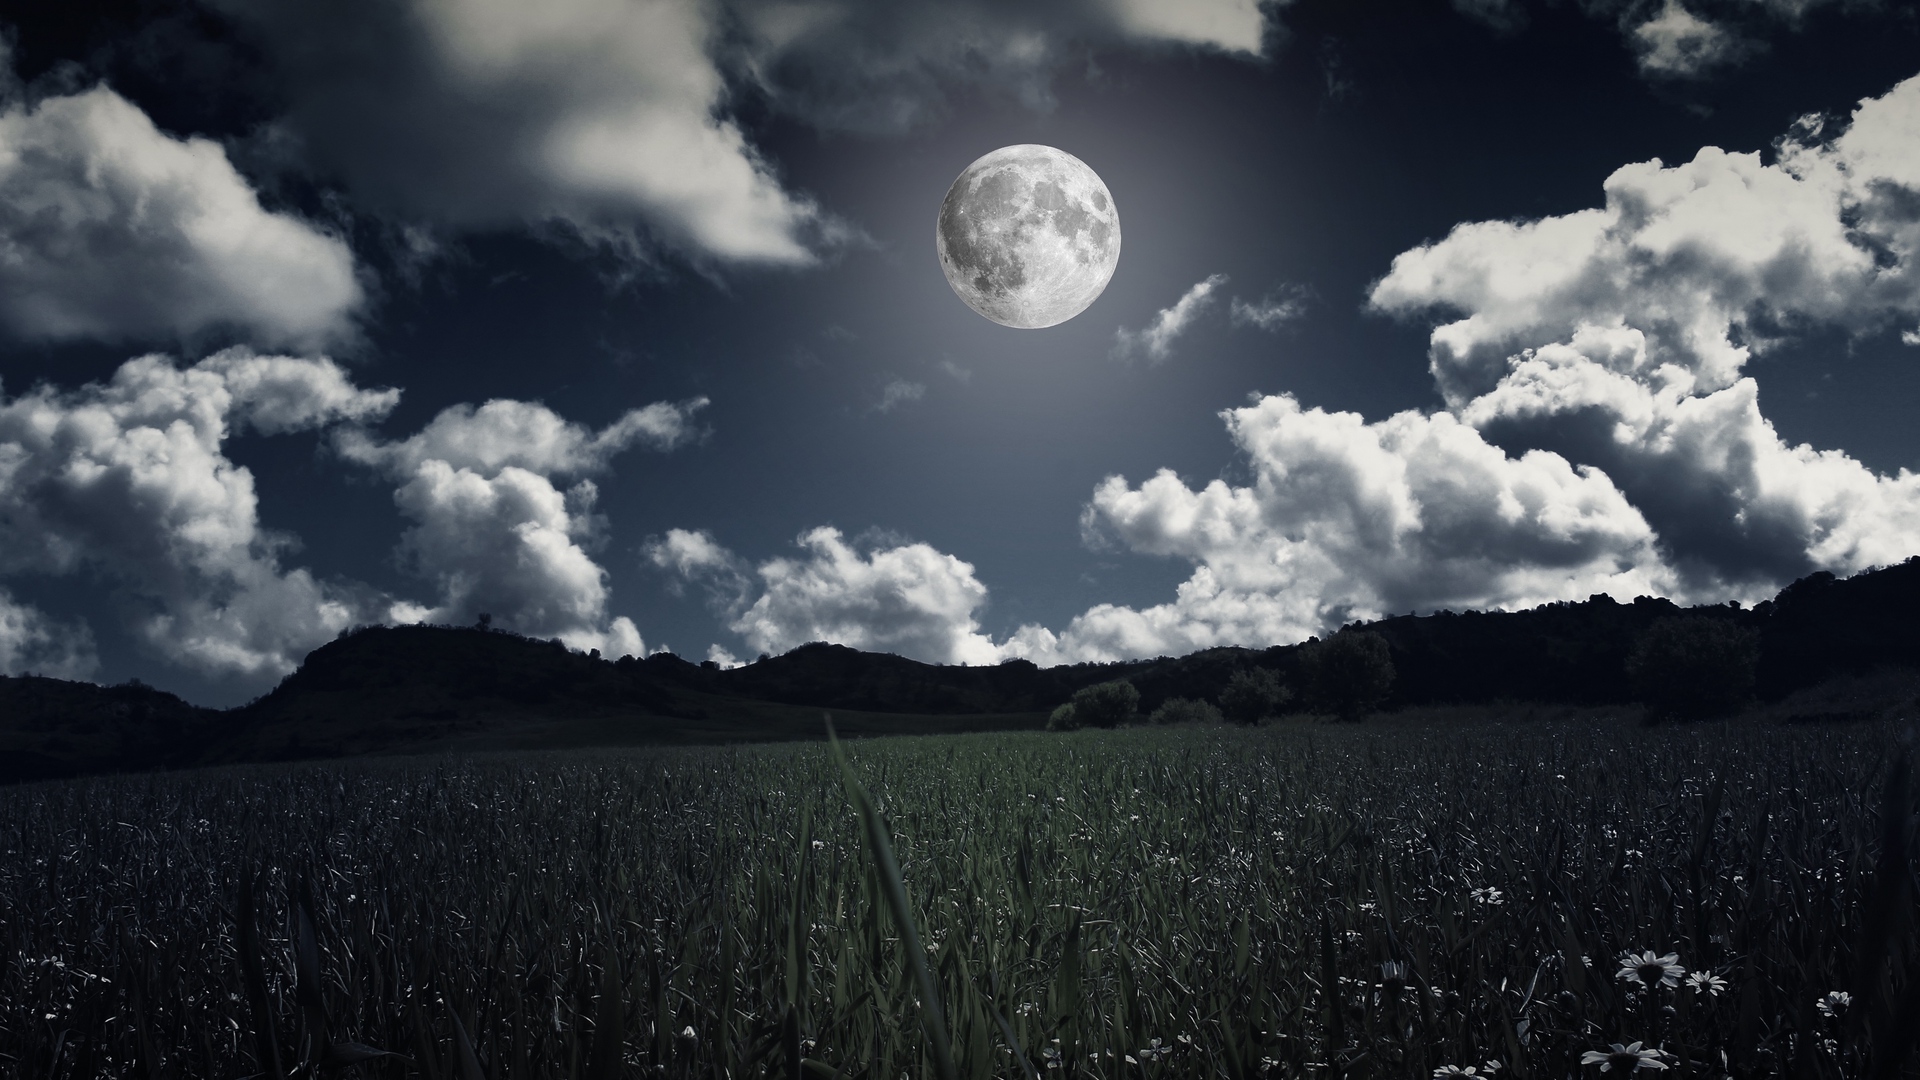 Wallpaper Moon, Clouds, Grass, Field, Full Moon, Photoshop - Moon In The Clouds - HD Wallpaper 